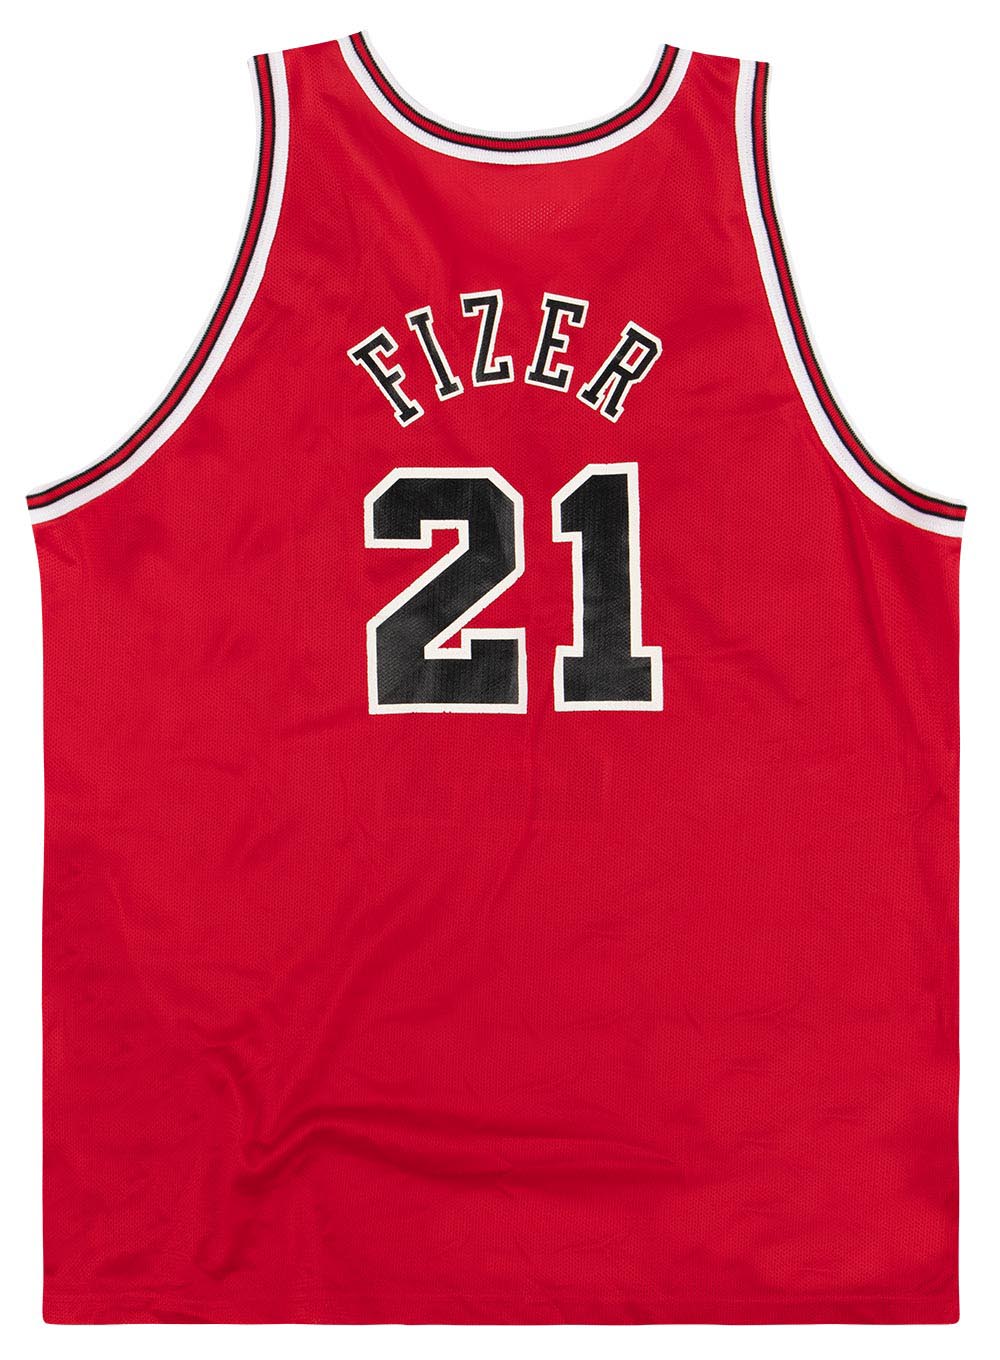 Marcus Fizer Chicago Bulls #21 Autographed Jersey wCOA and Tags